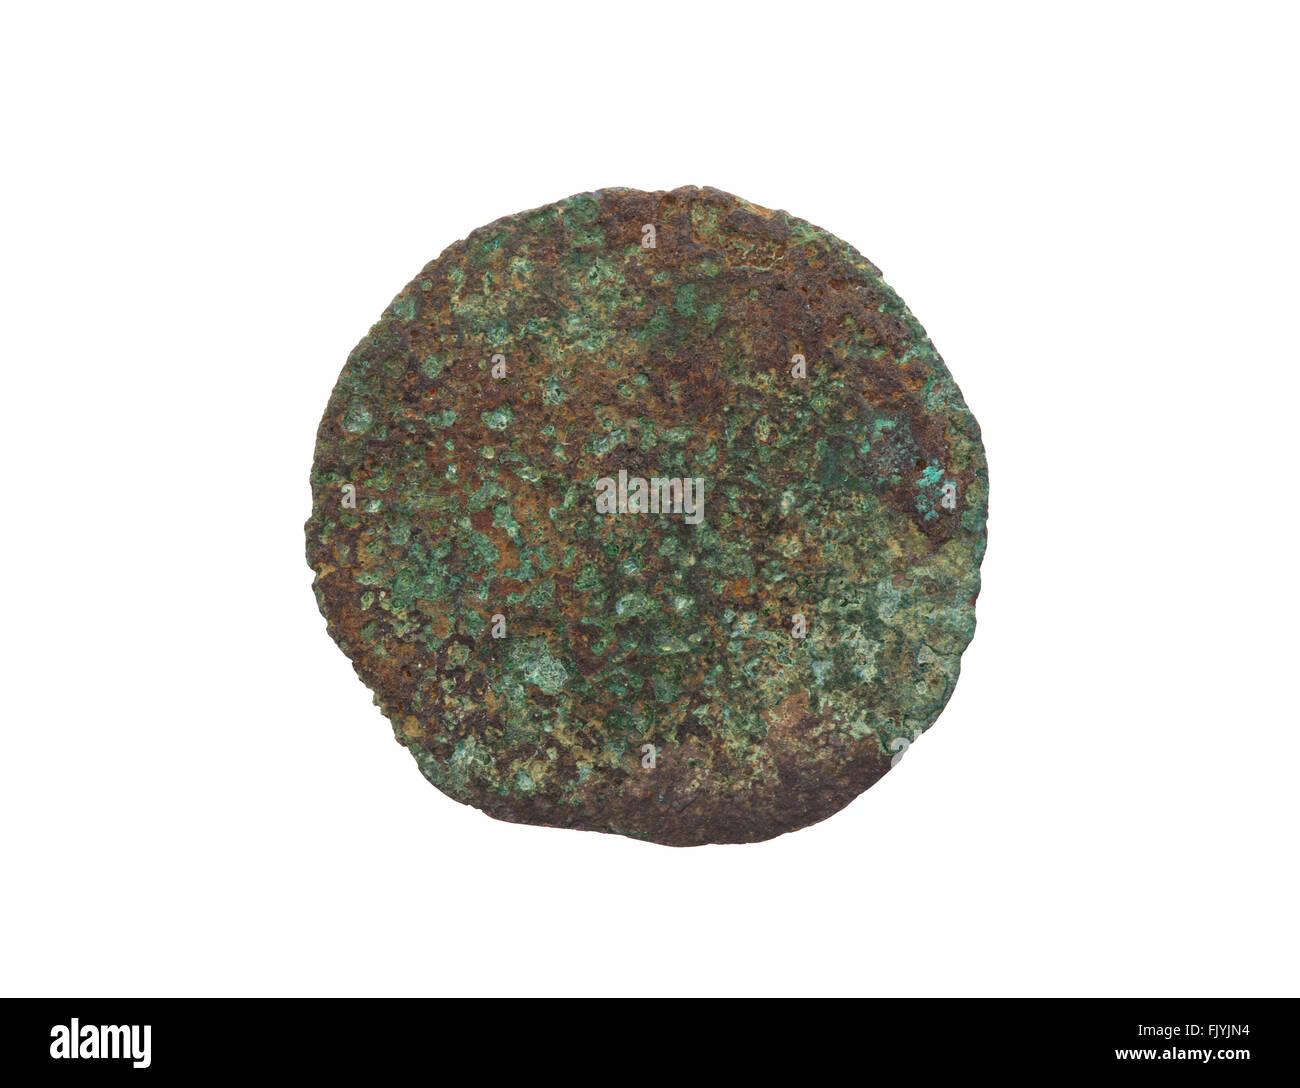 Unrecognisable old coin, rusted and green, isolated on white Stock Photo